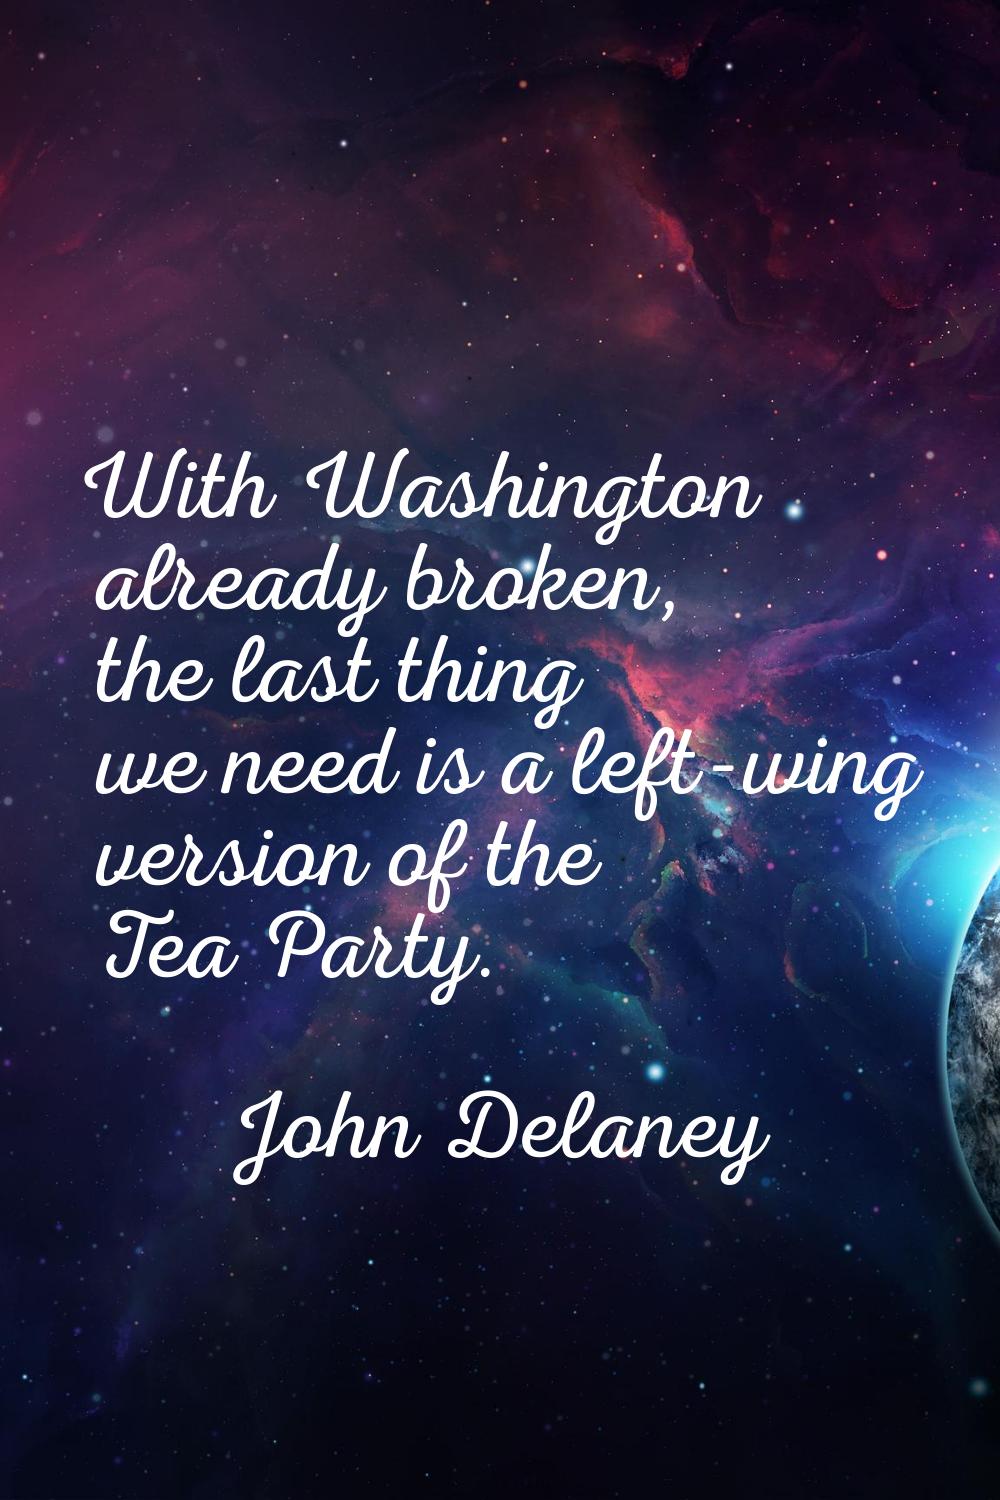 With Washington already broken, the last thing we need is a left-wing version of the Tea Party.